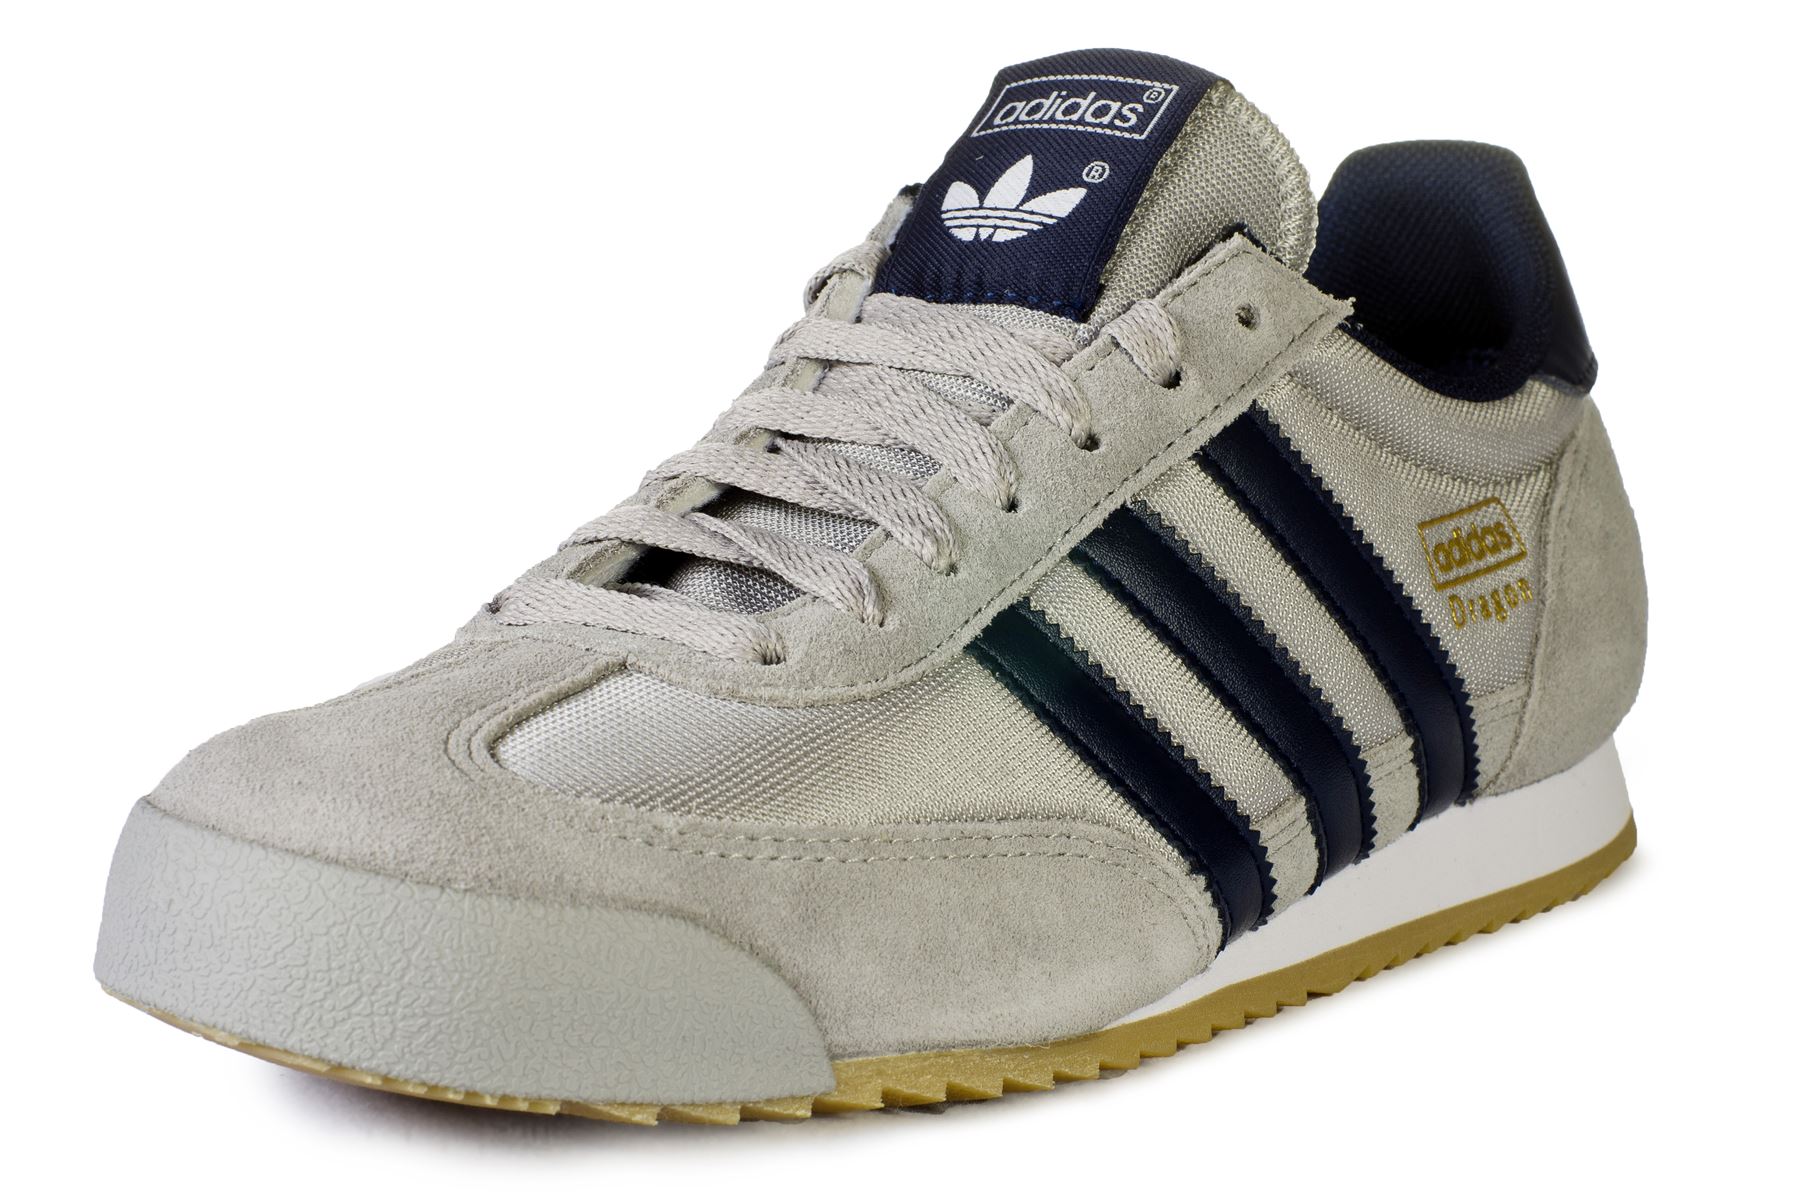 adidas classic trainers